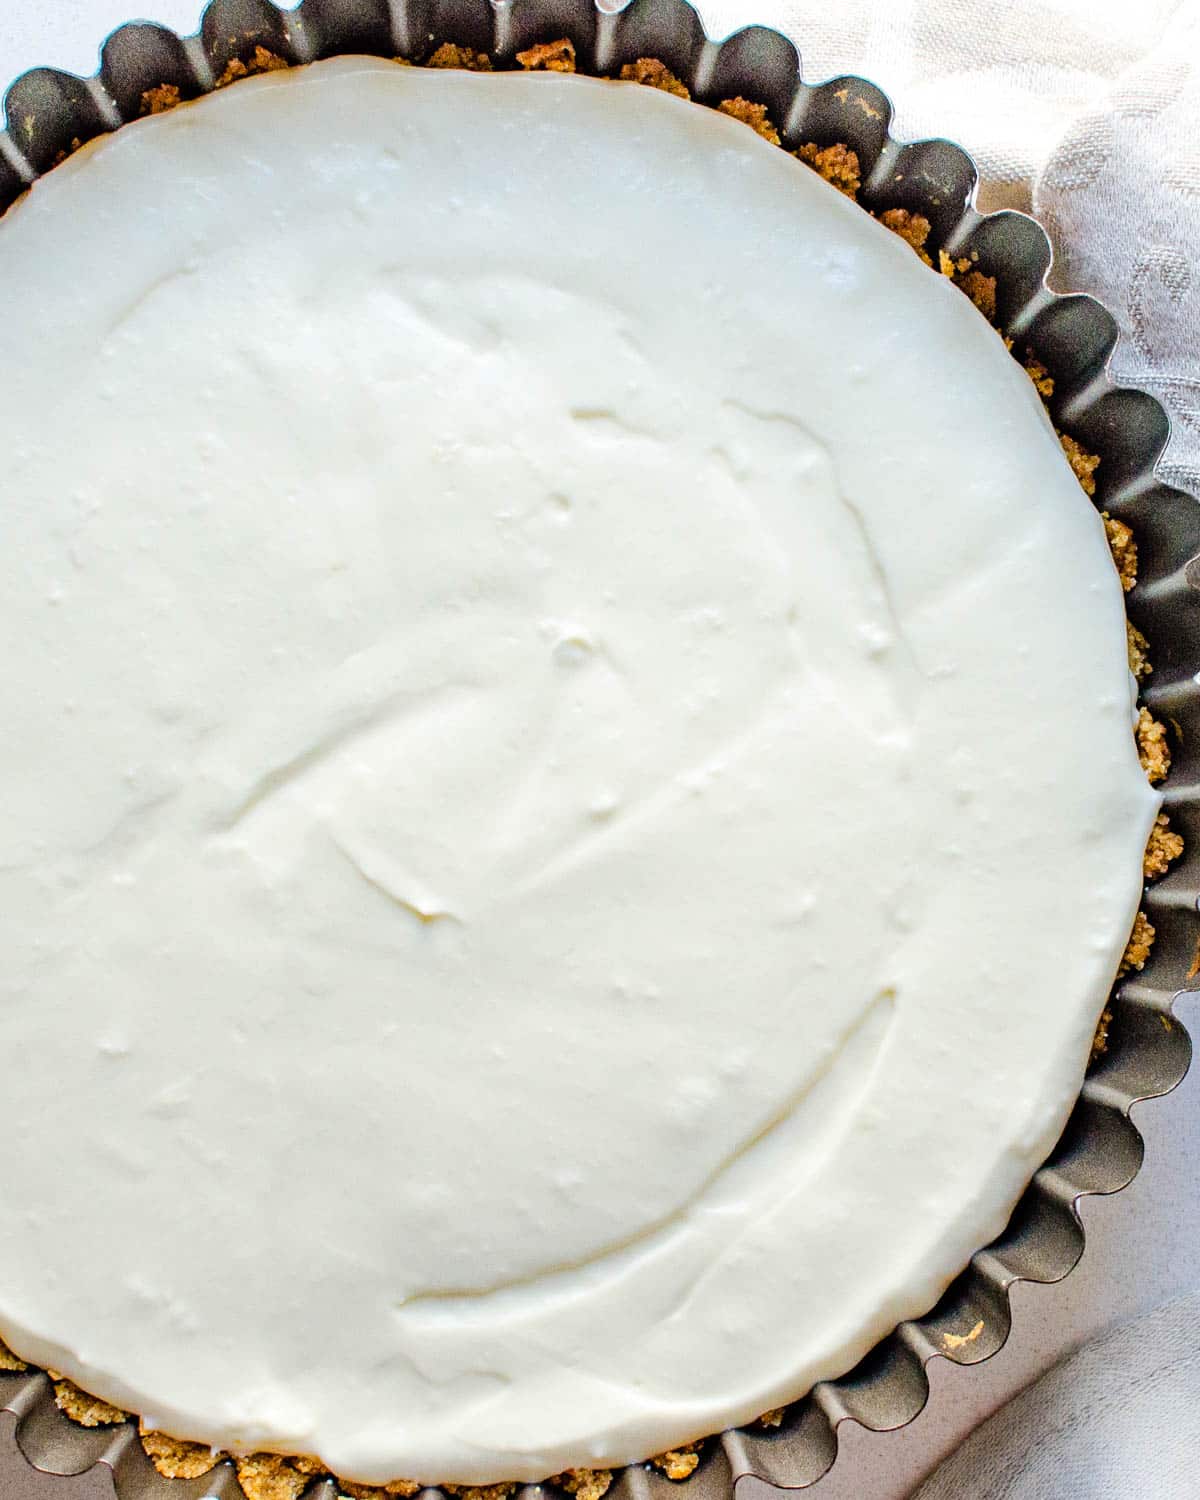 Fill the baked crust with key lime mousse.